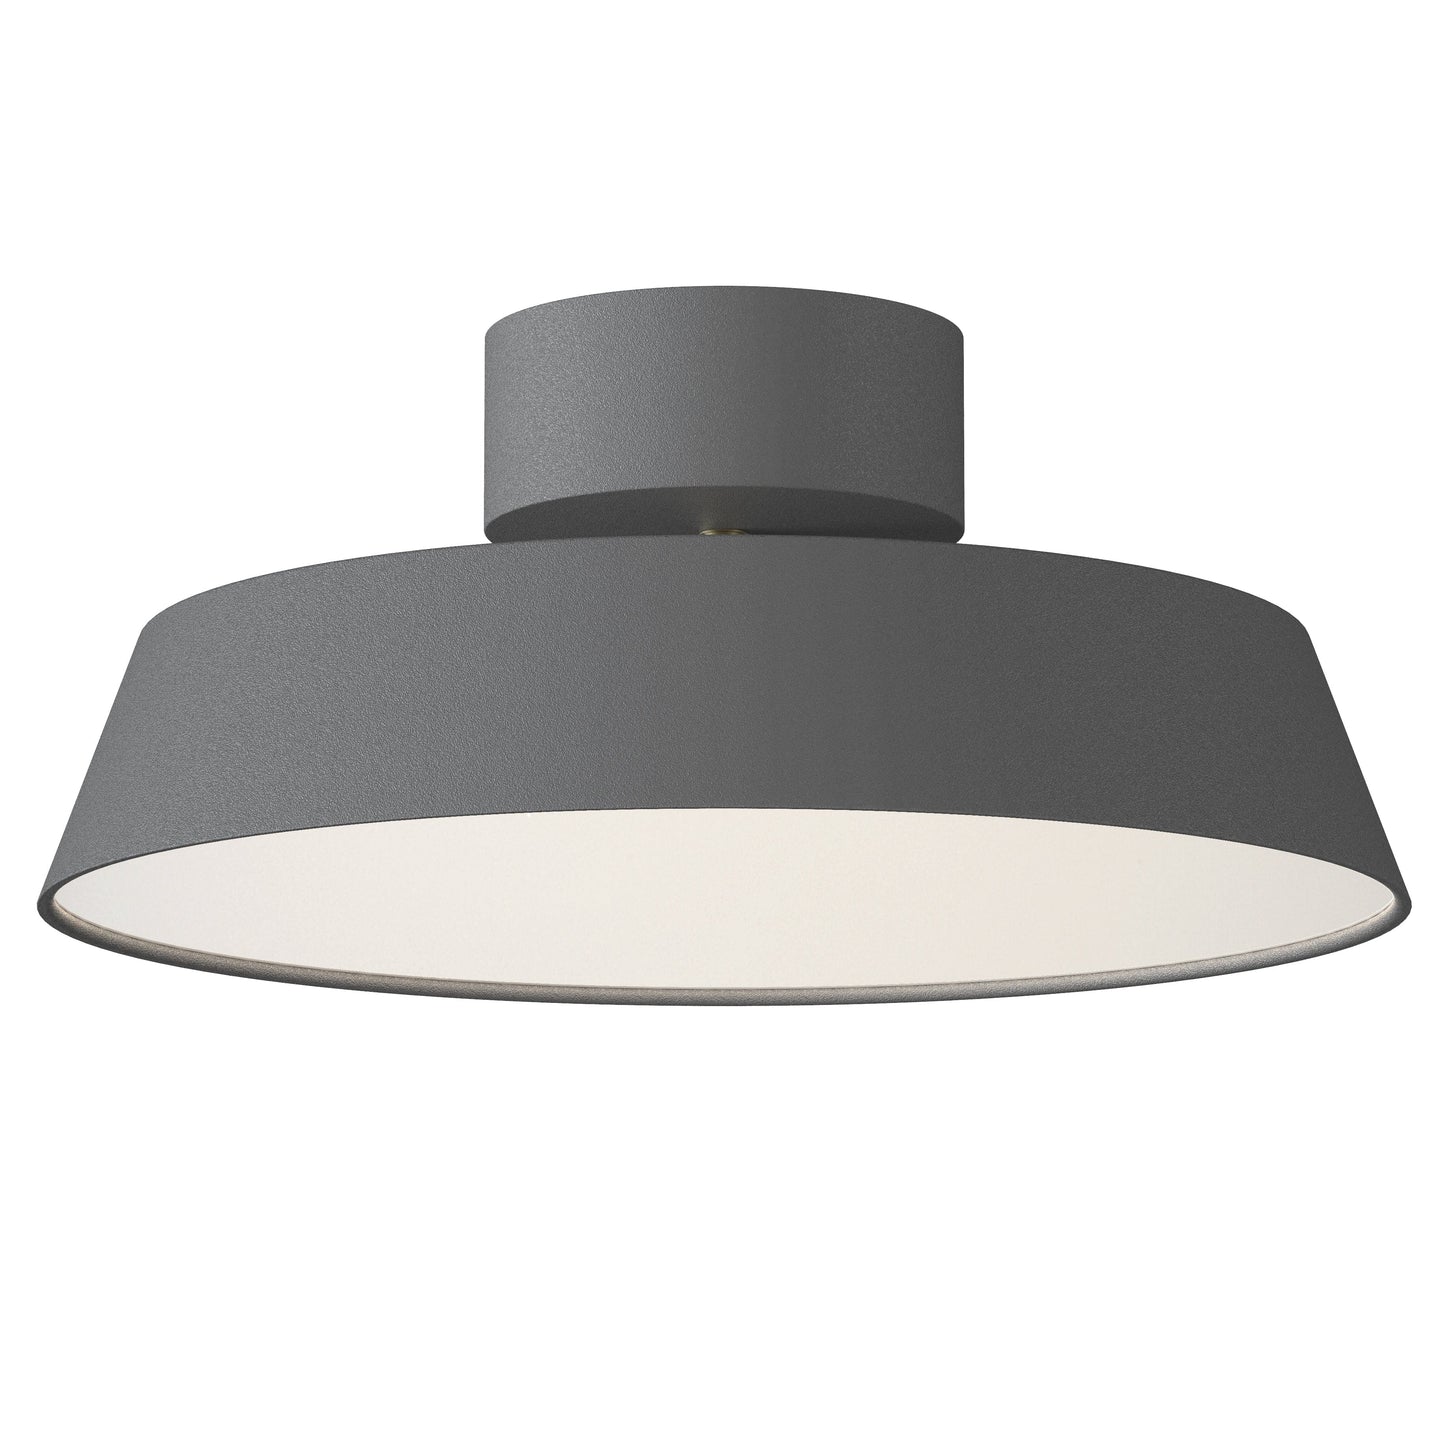 Nordlux - DFTP Ceiling light Grey Kaito Ceiling Light, dimmable